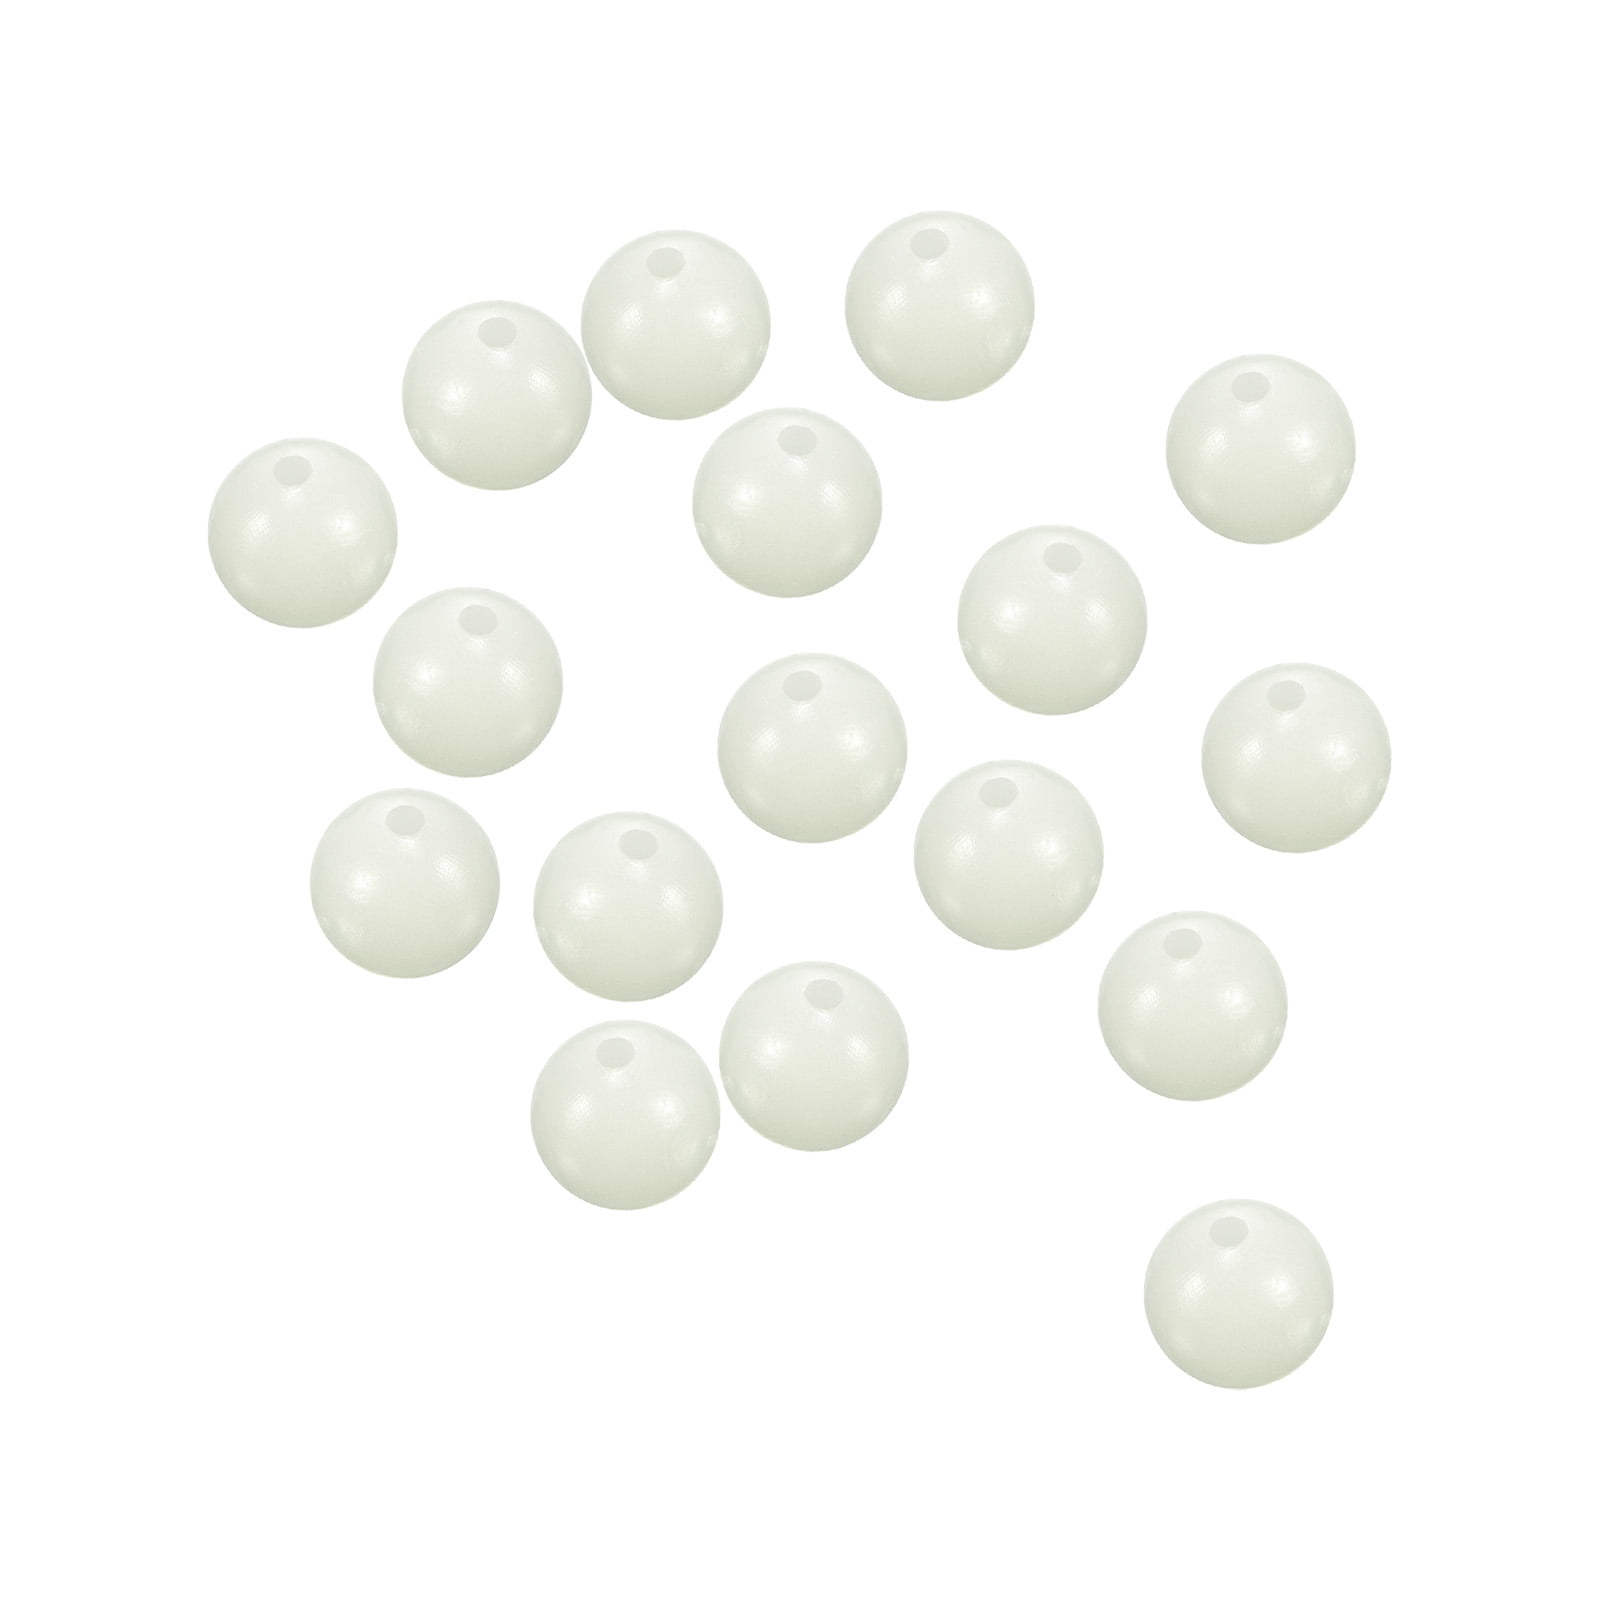 Uxcell 4mm Round Soft Plastic Luminous Glow Fishing Beads Tackle Tool White 200 Pieces, Size: 4 mm